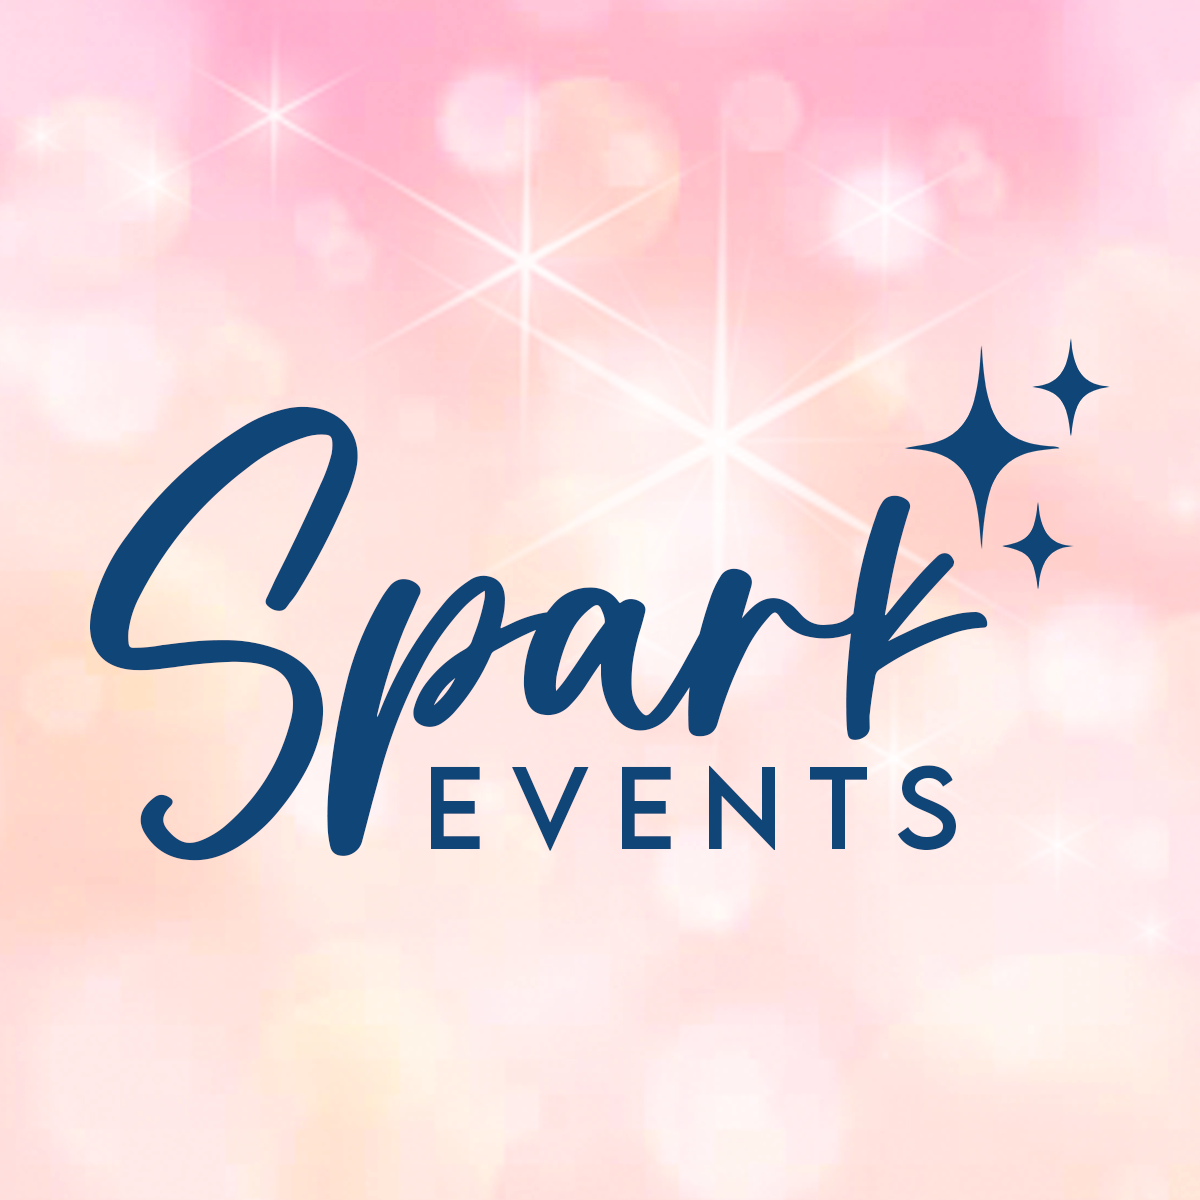 Sparks Events